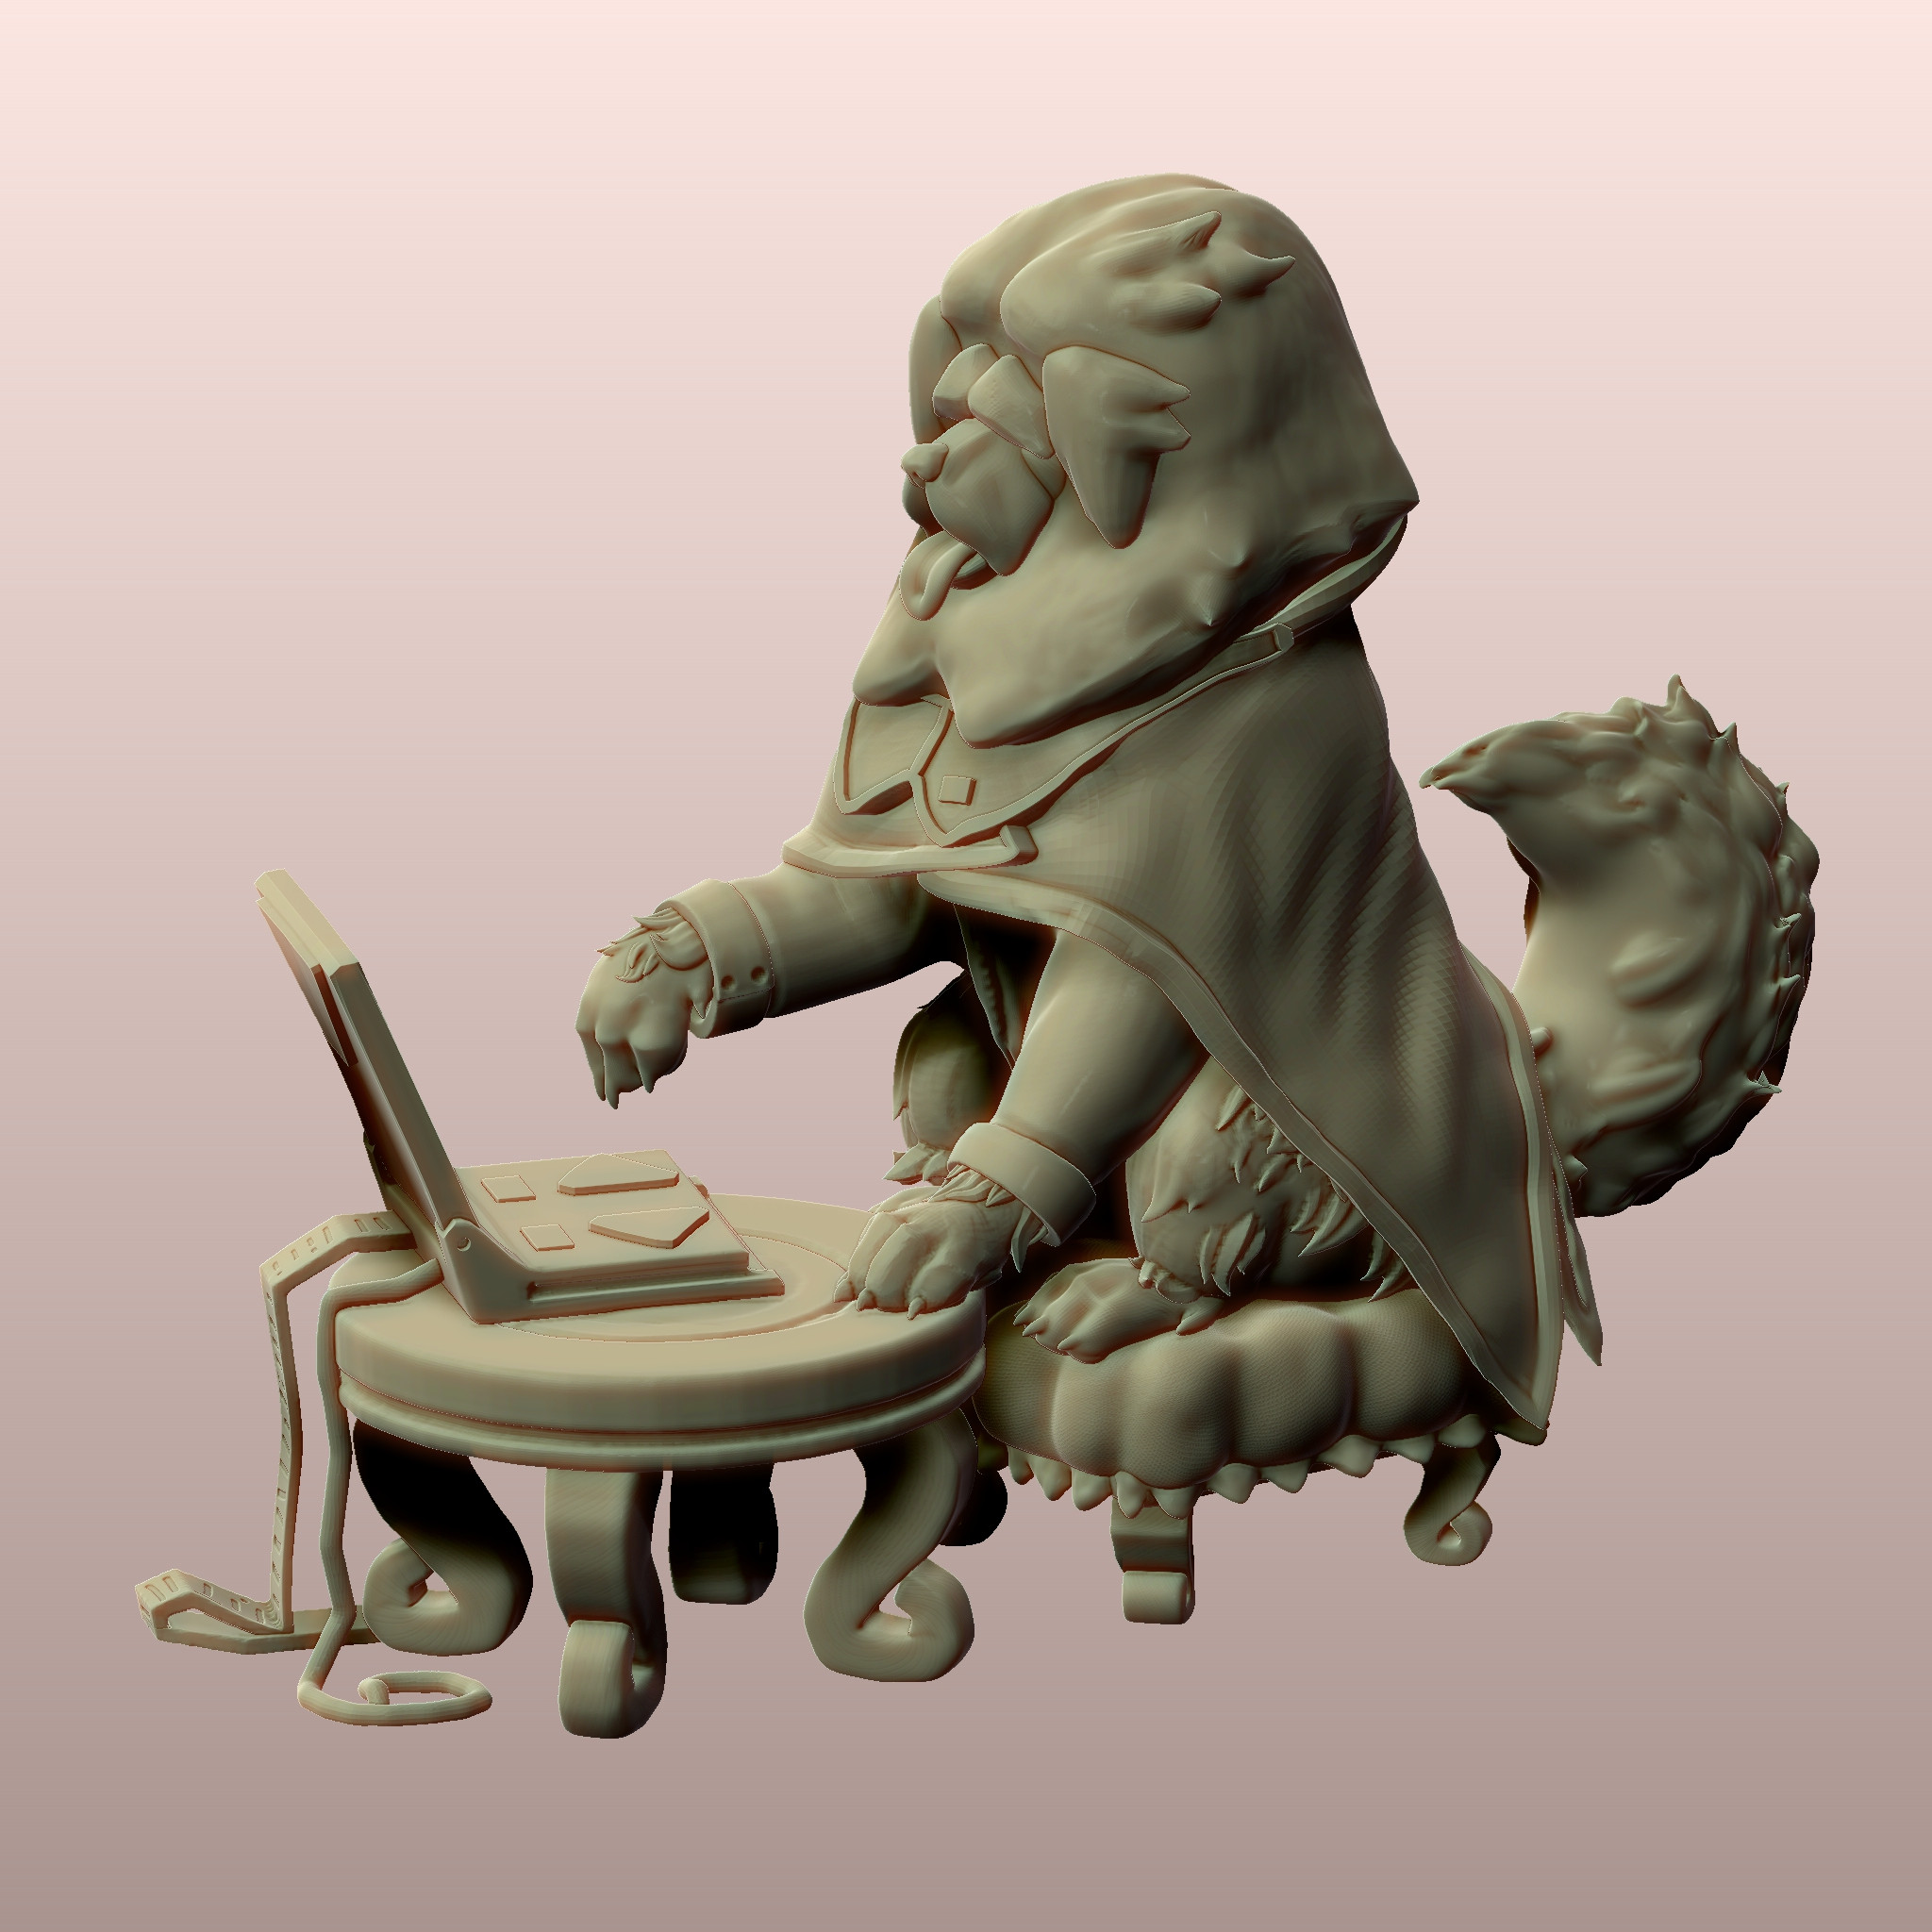 Show clay Render